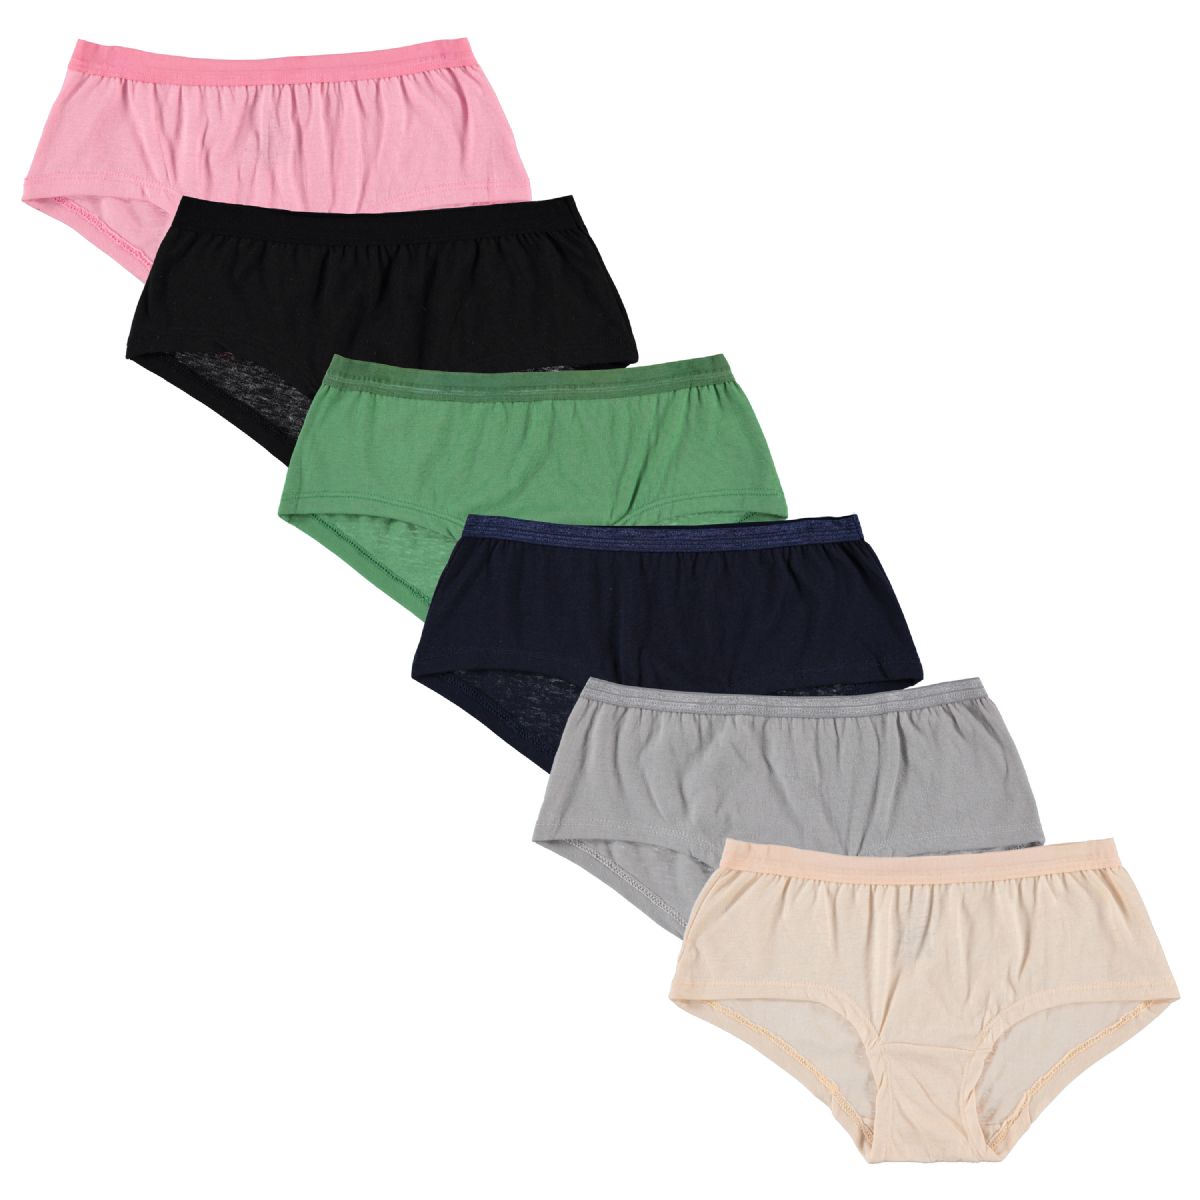 24 Wholesale Yacht & Smith Womens Cotton Lycra Underwear, Panty Briefs, 95% Cotton Soft Assorted Colors, Size Small